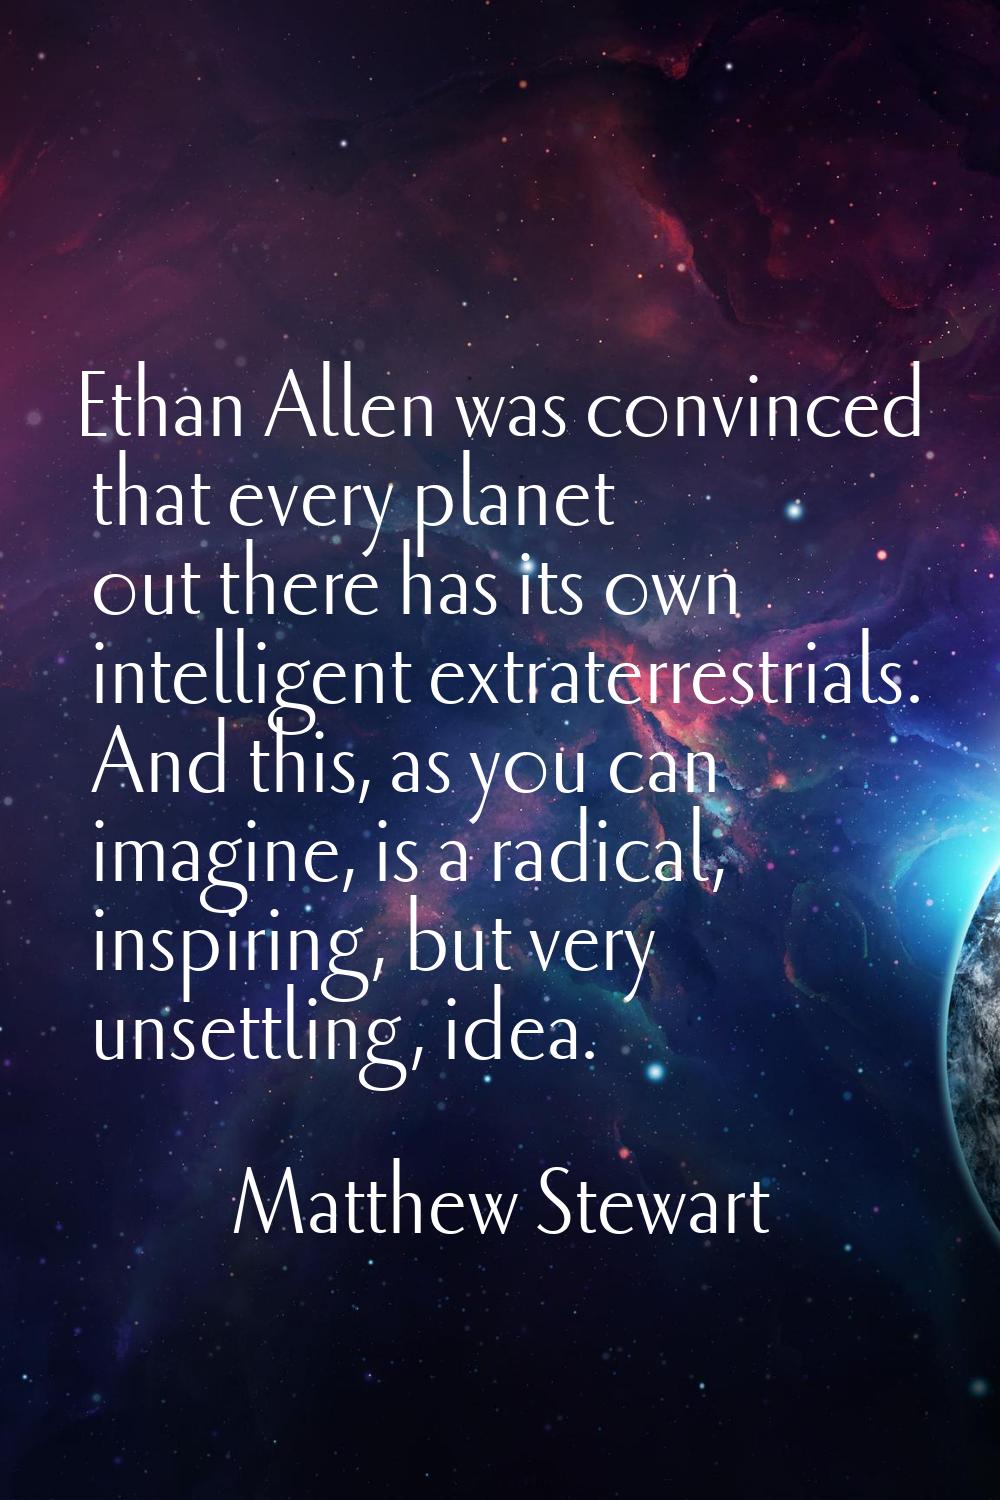 Ethan Allen was convinced that every planet out there has its own intelligent extraterrestrials. An